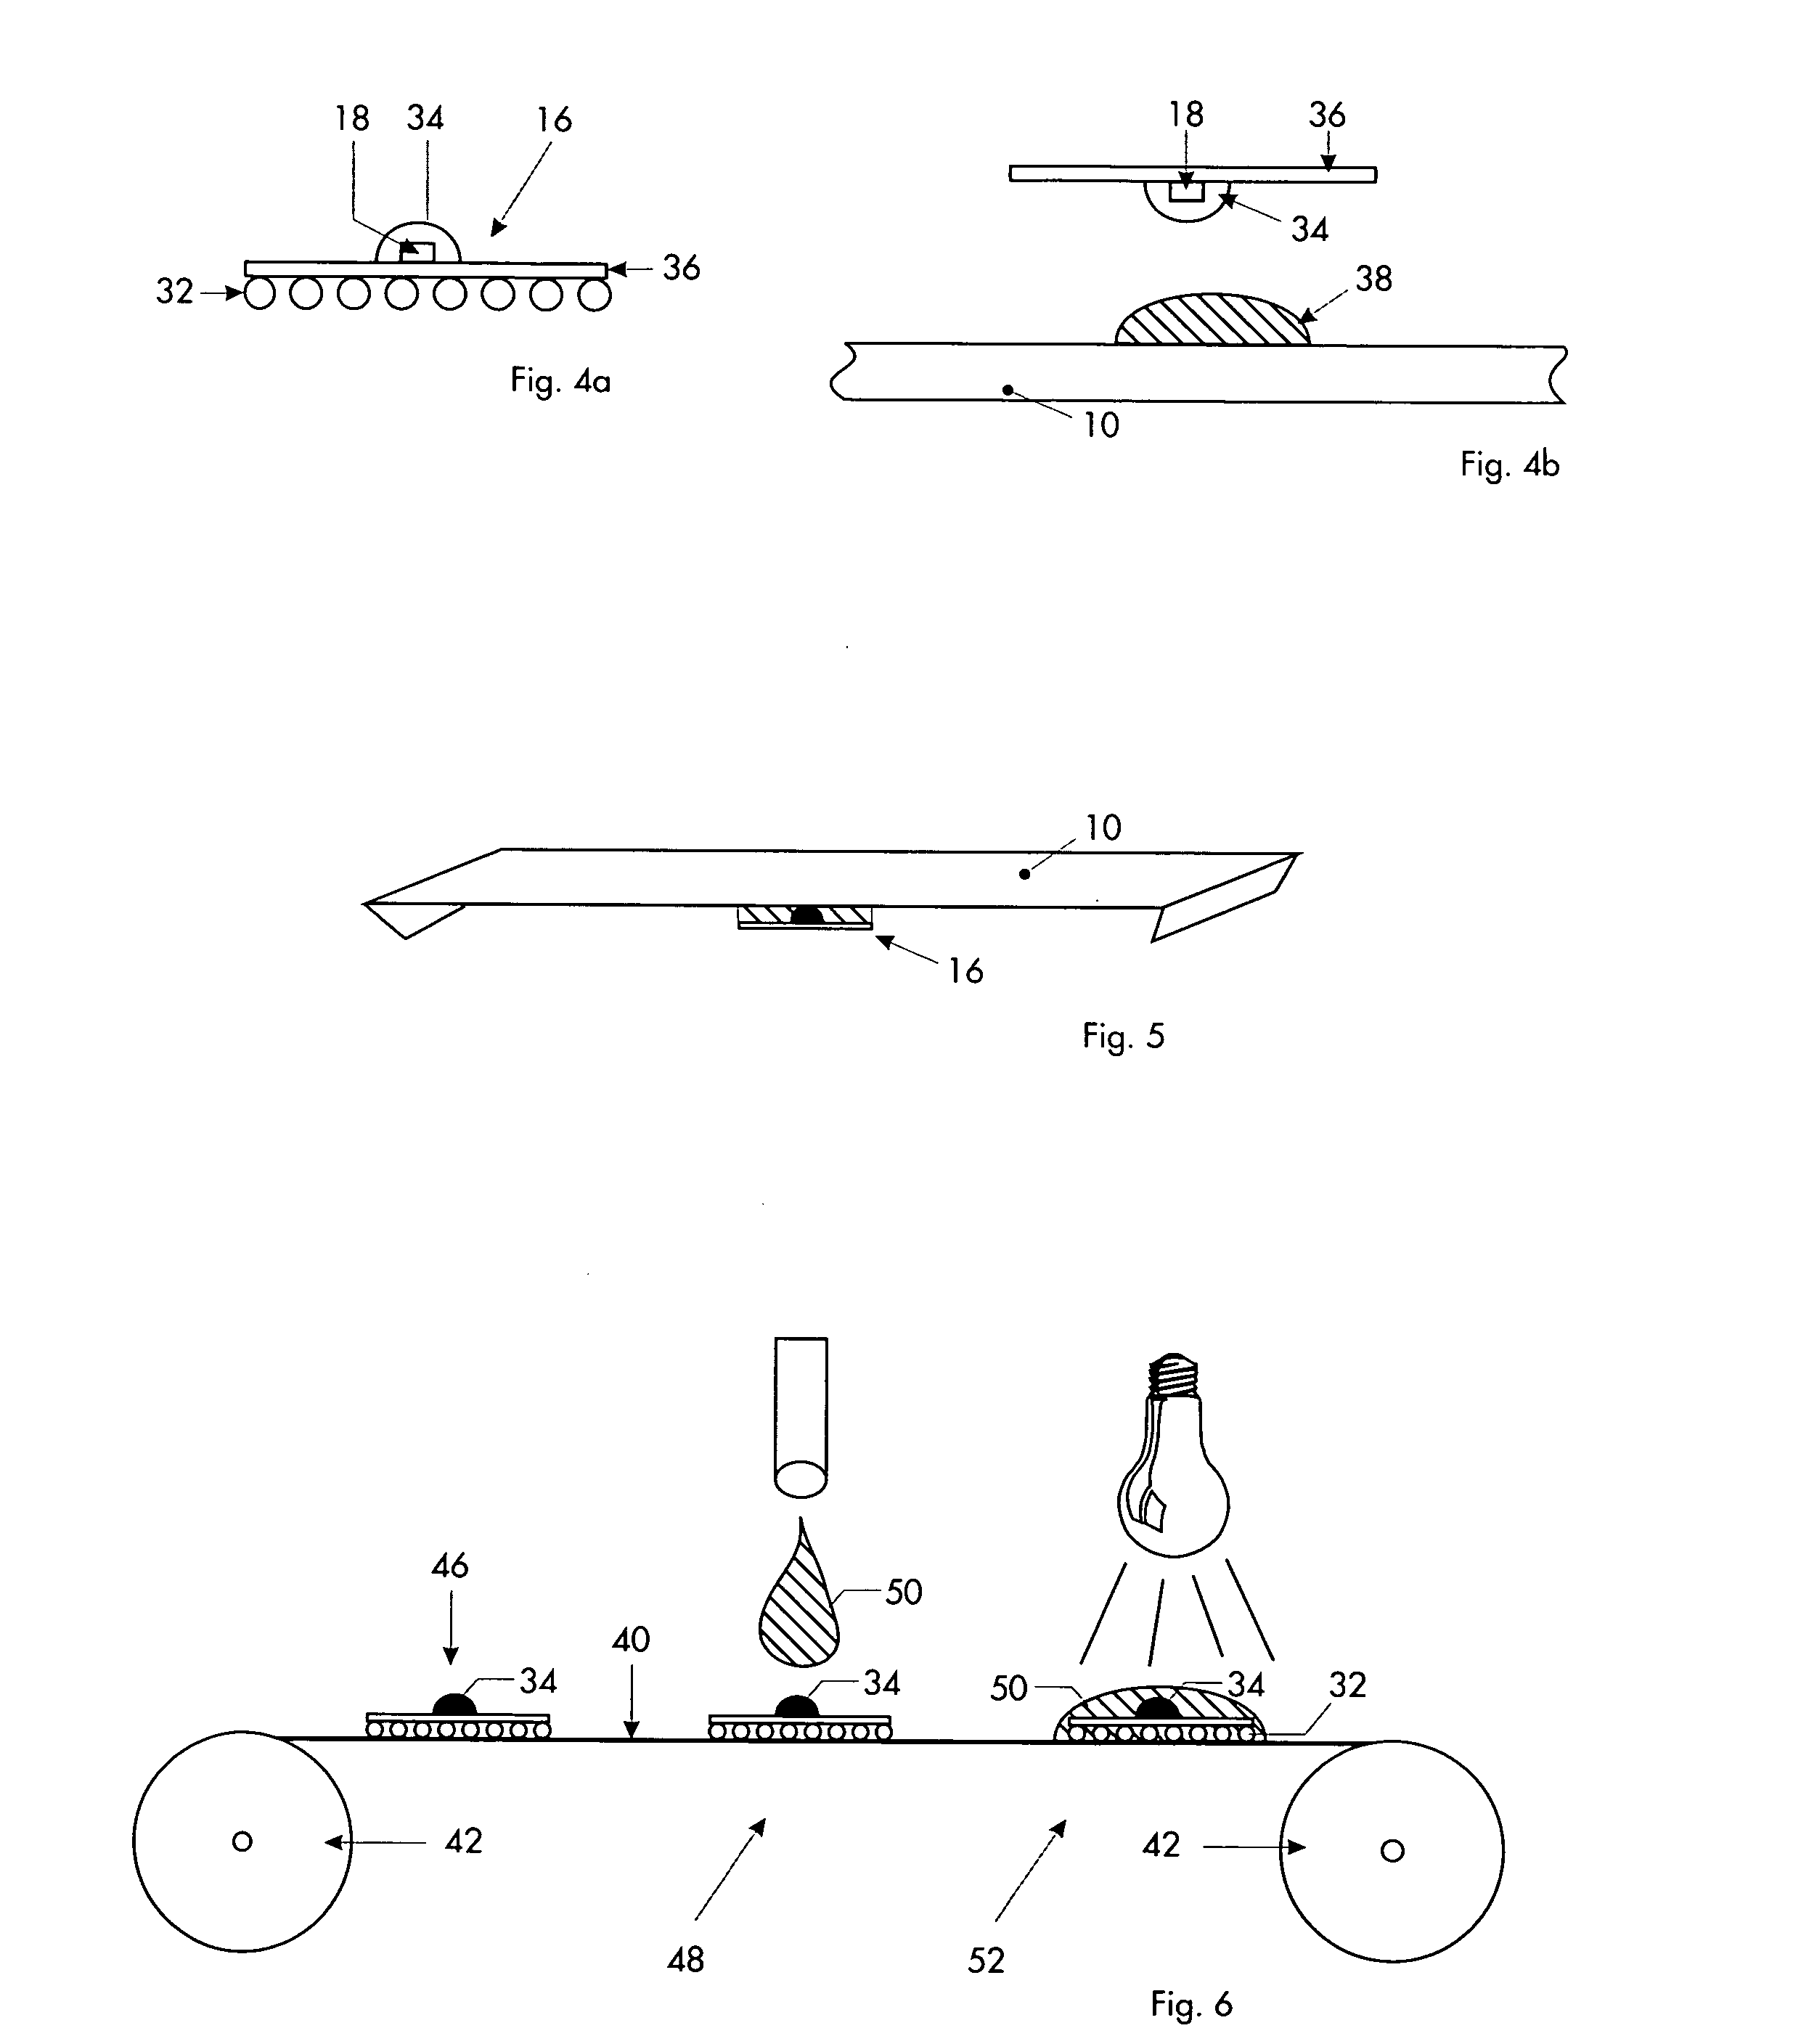 Information carrier arrangement, washable textile goods and electronic ear tag for living beings